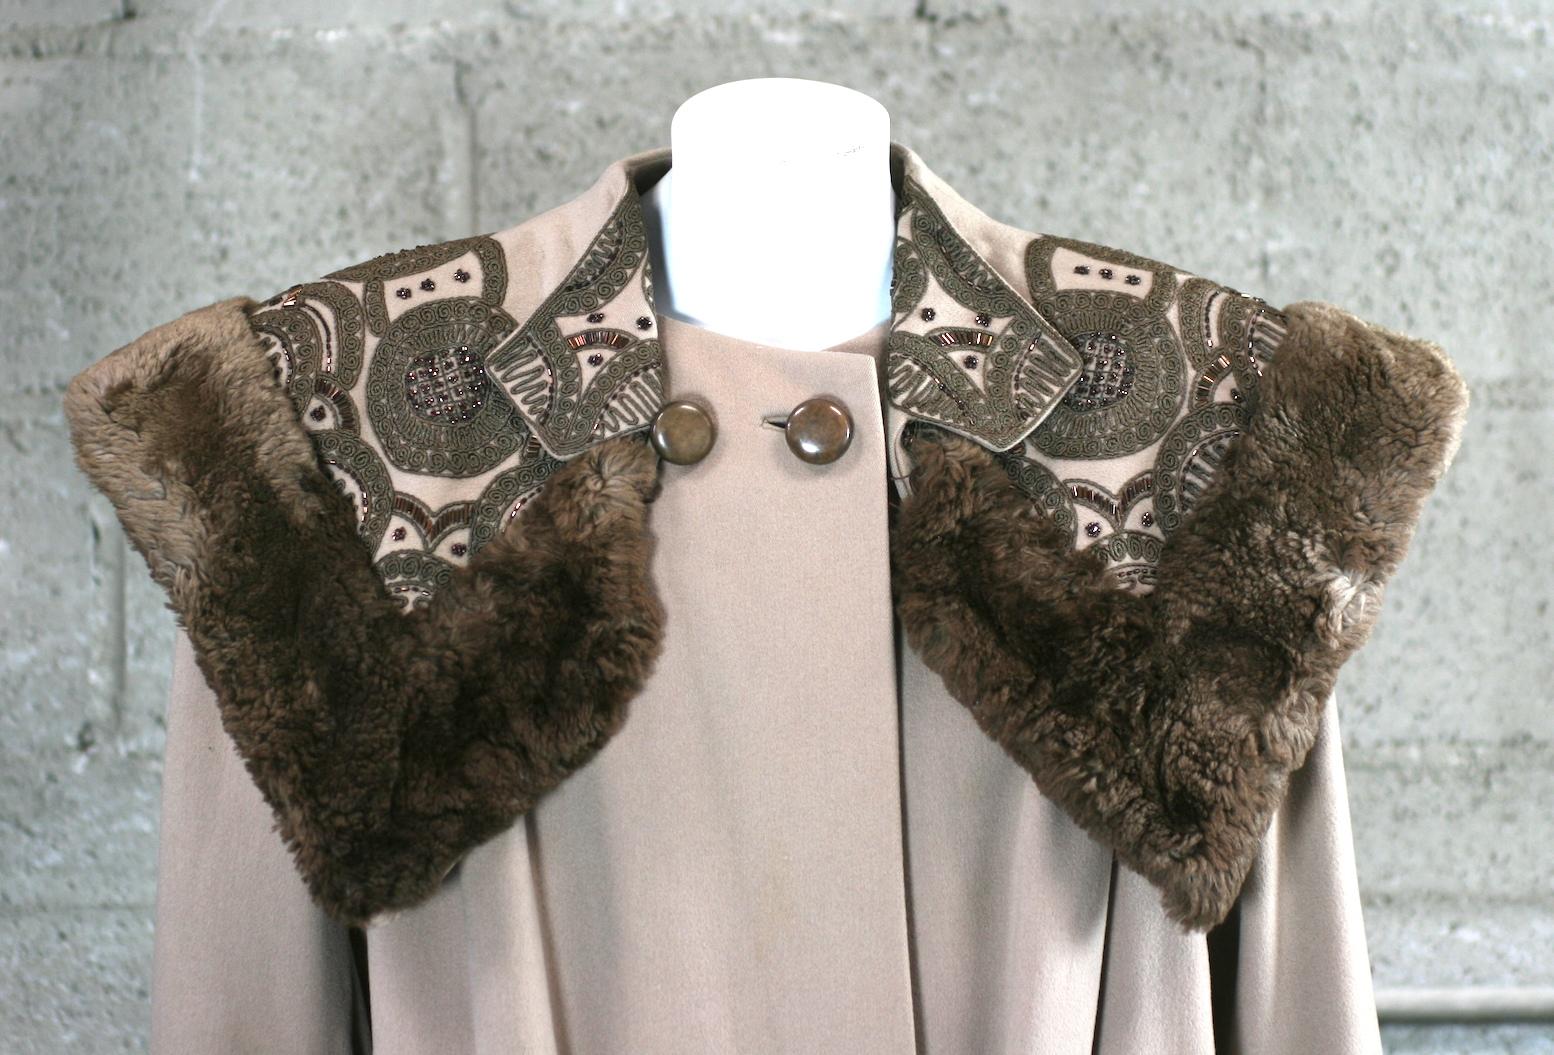 Glamorous Beaded and Mouton Trimmed Fawn Wool Coat from the 1940's with elaborate soutache embroidery and copper beading on cape and pockets. Satin lining.
Capelet once was tacked on but has been detached. (We can reattach if requested.) 
Large,